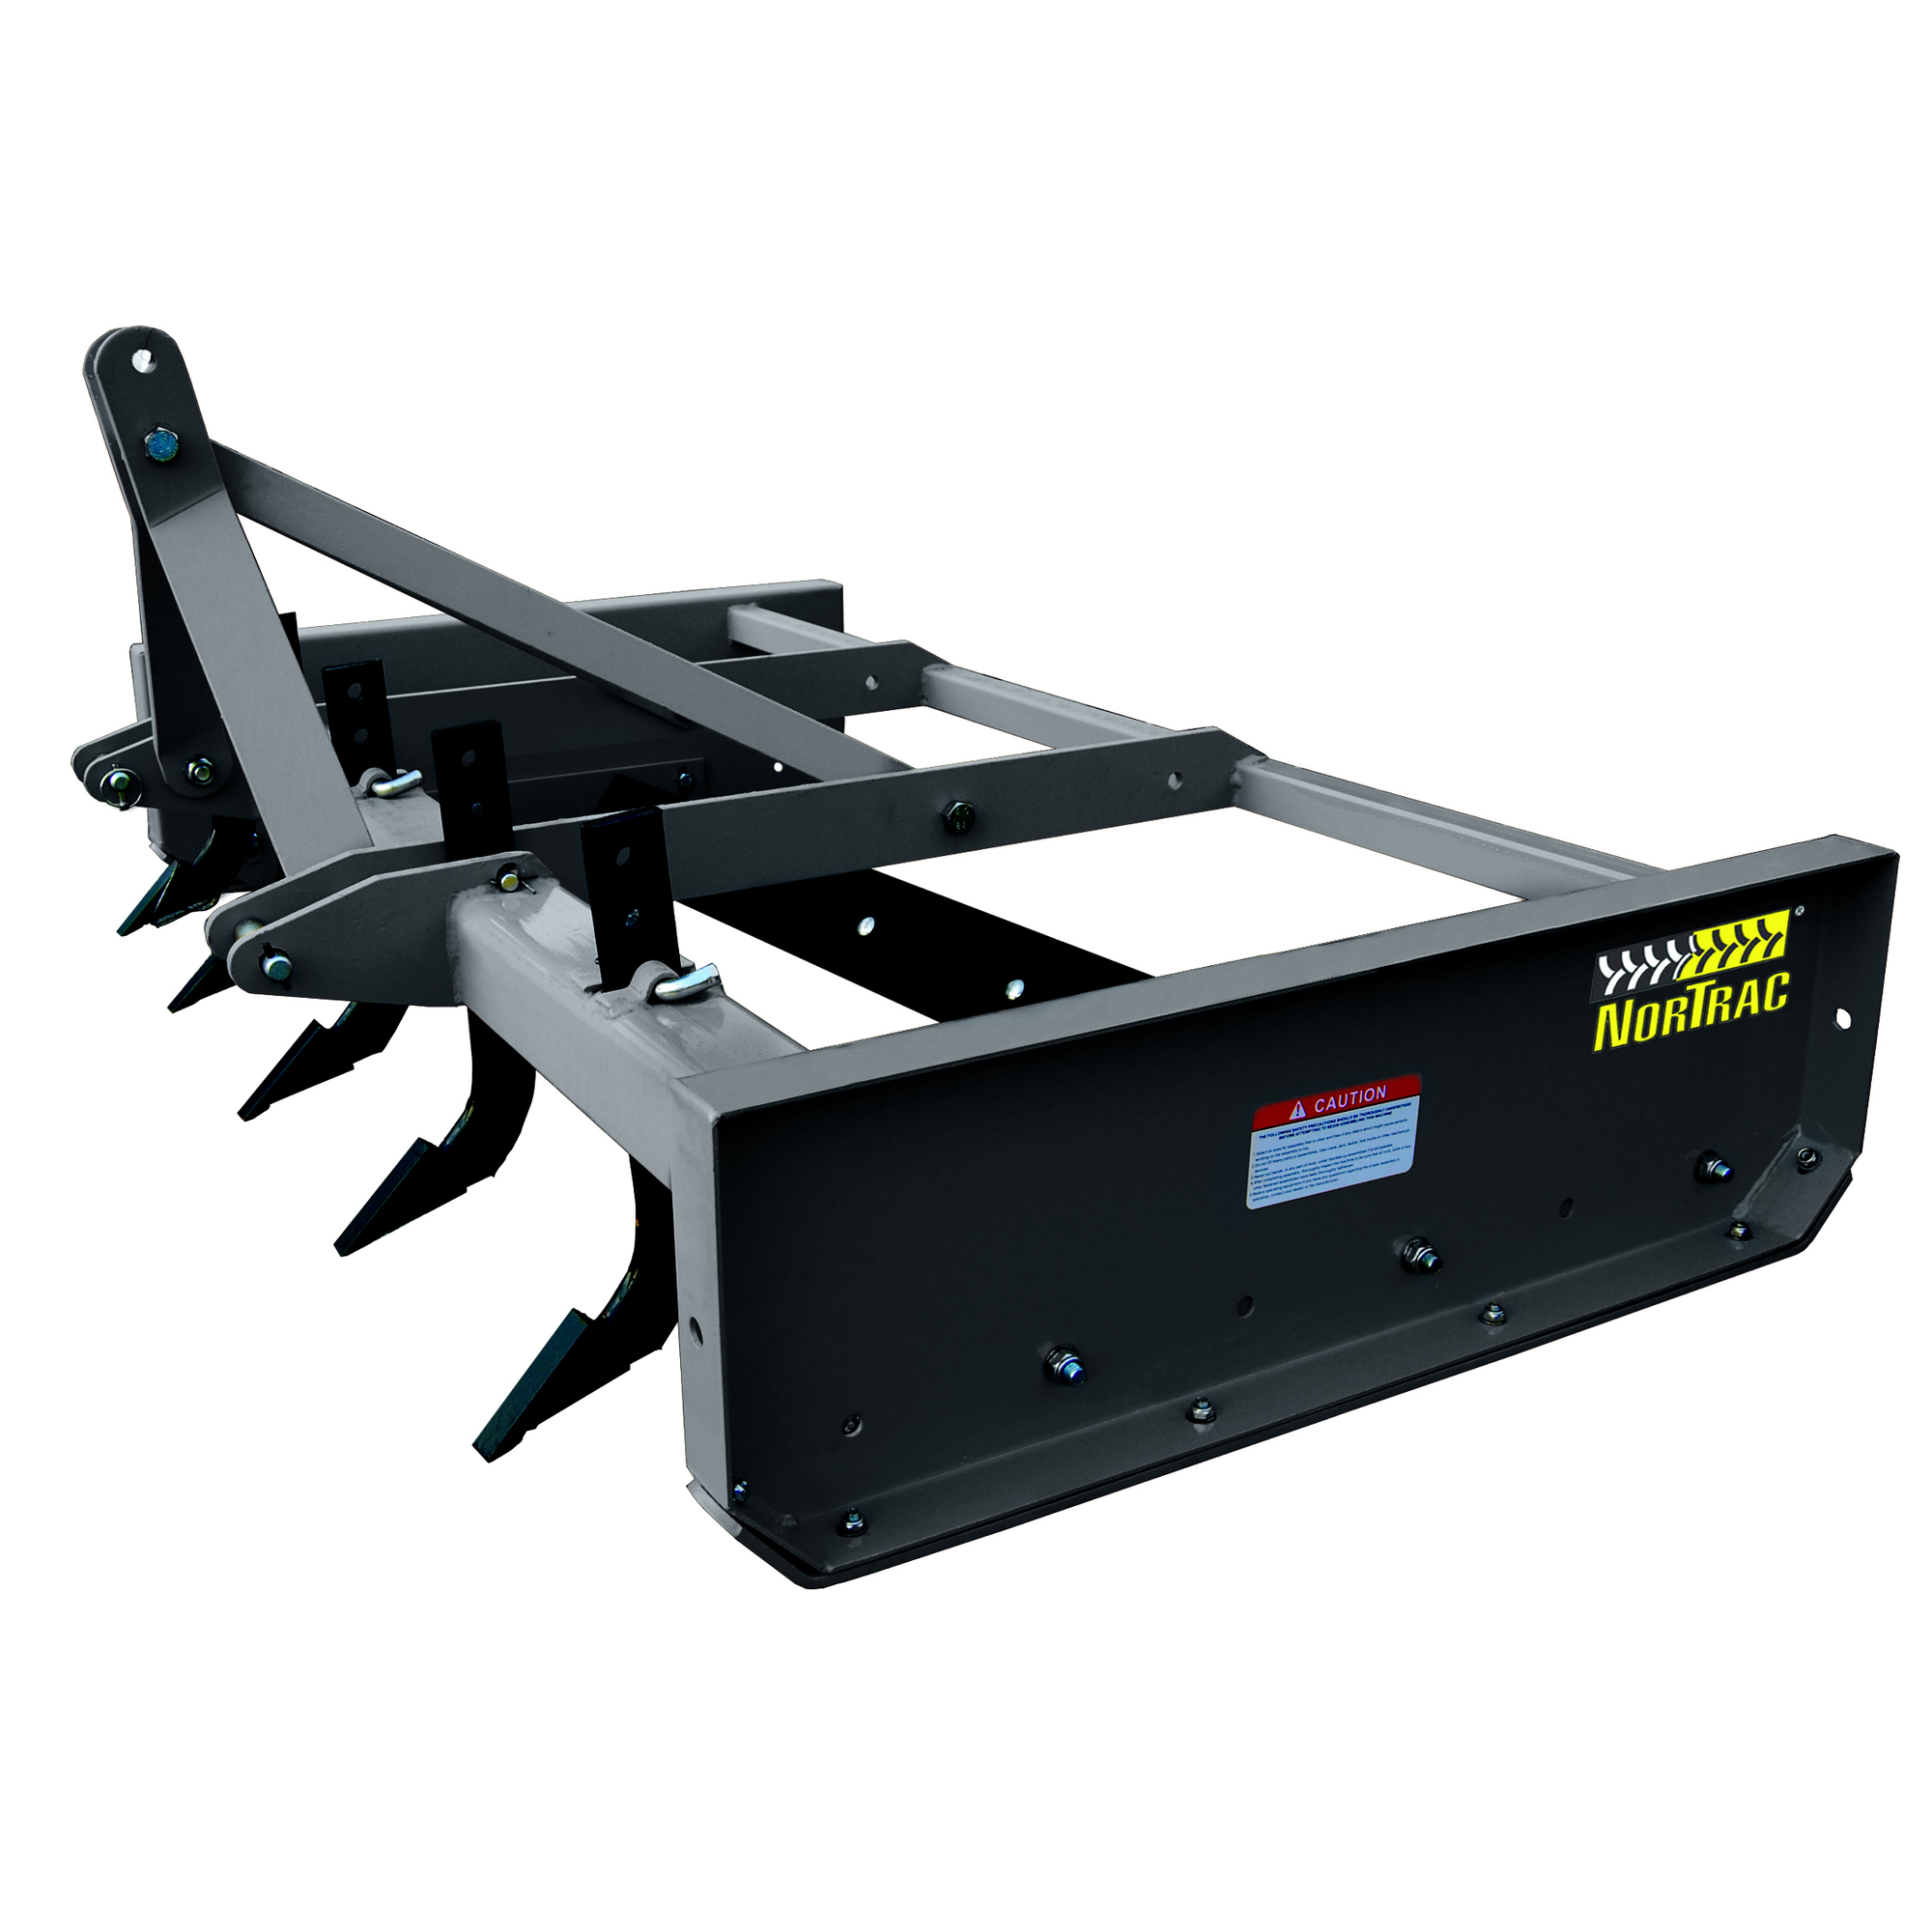 NorTrac 3-Point Box Grader Scraper, 54Inch Working Width, Category 1, Model BE-GS045N